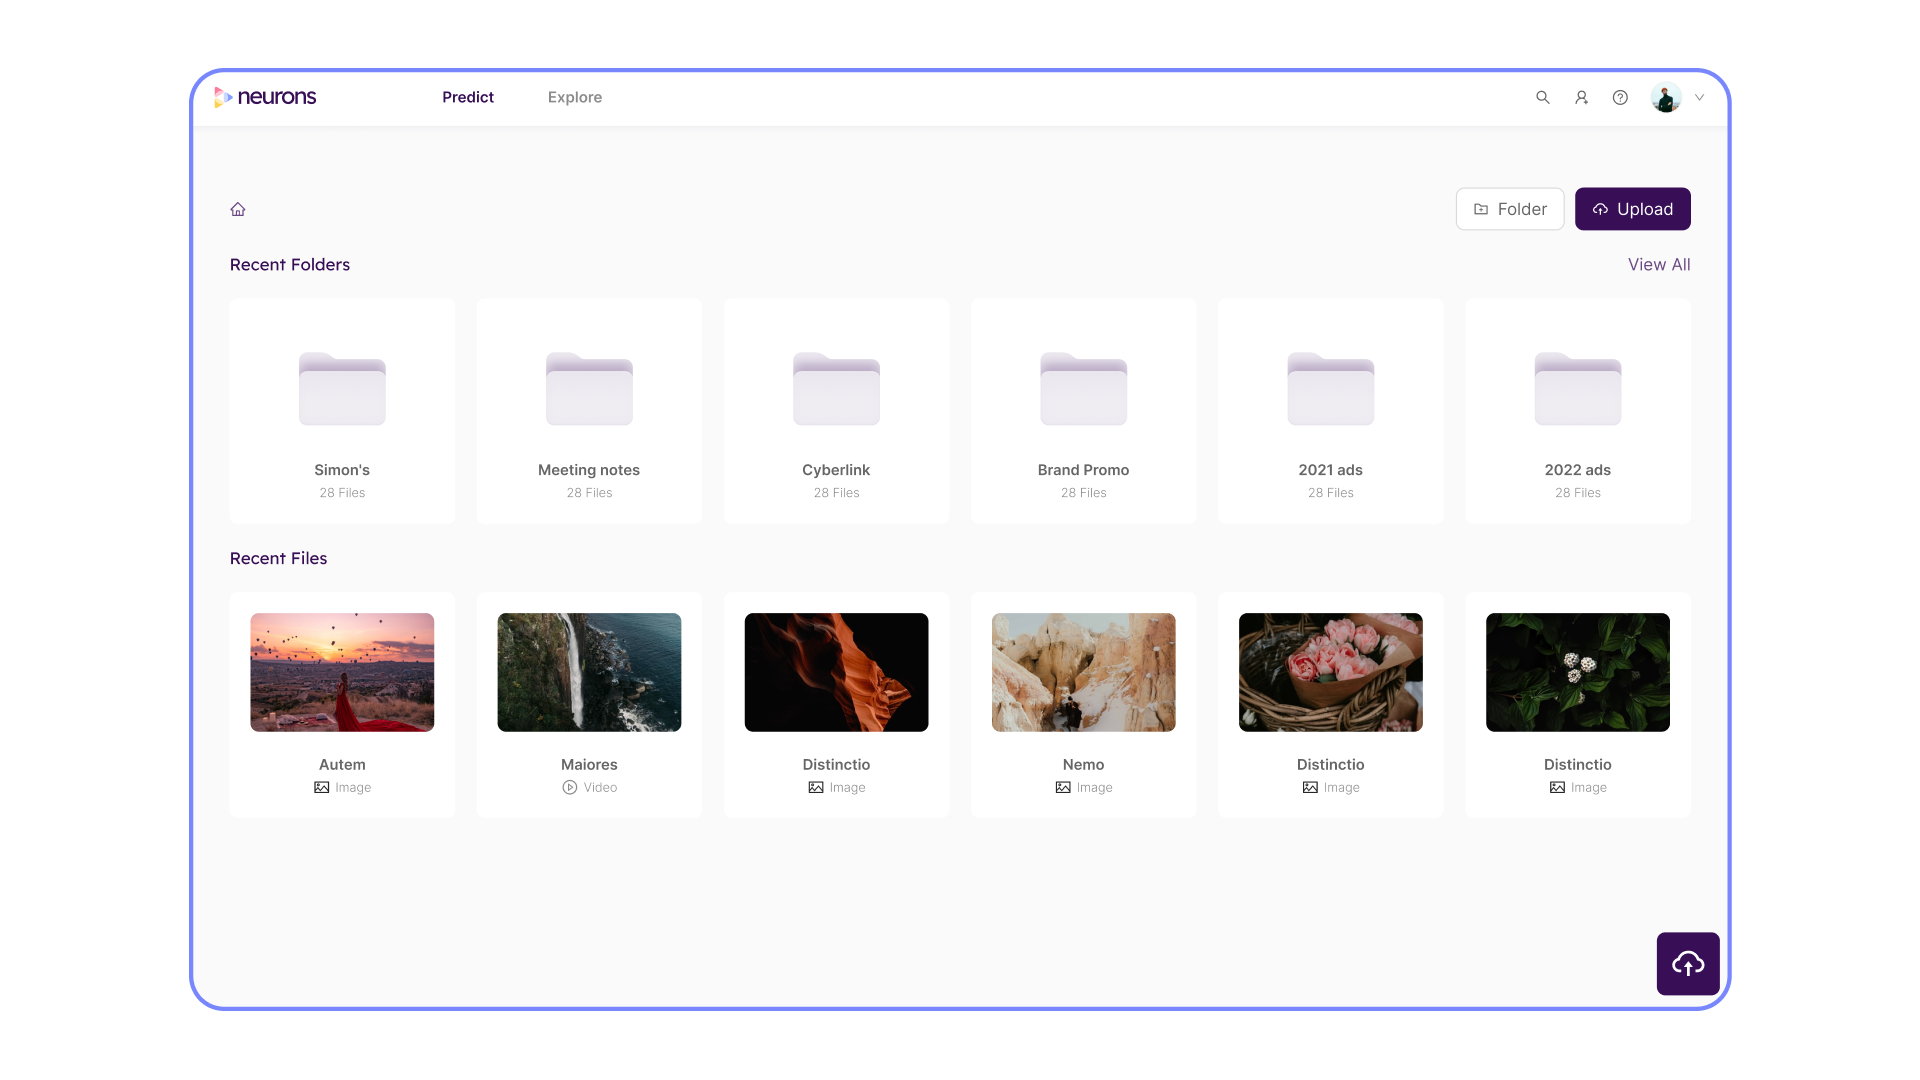 Collaborate with your team by combining all of your visual assets on one platform. Categorizing your images and videos to dedicated folders makes it easy to keep structure across the whole organization.